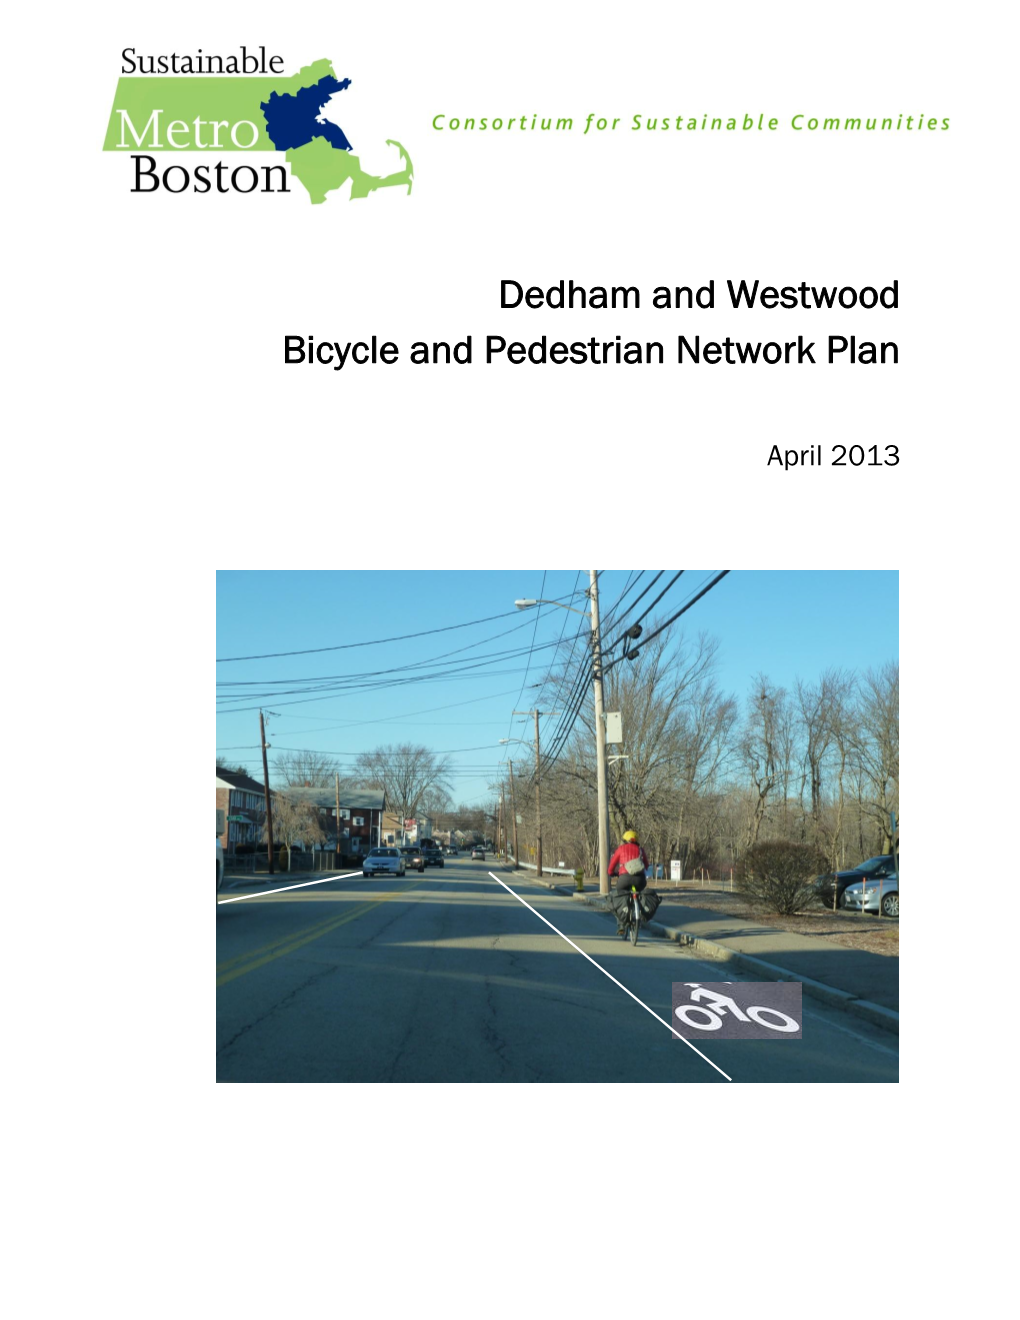 Dedham and Westwood Bicycle and Pedestrian Network Plan